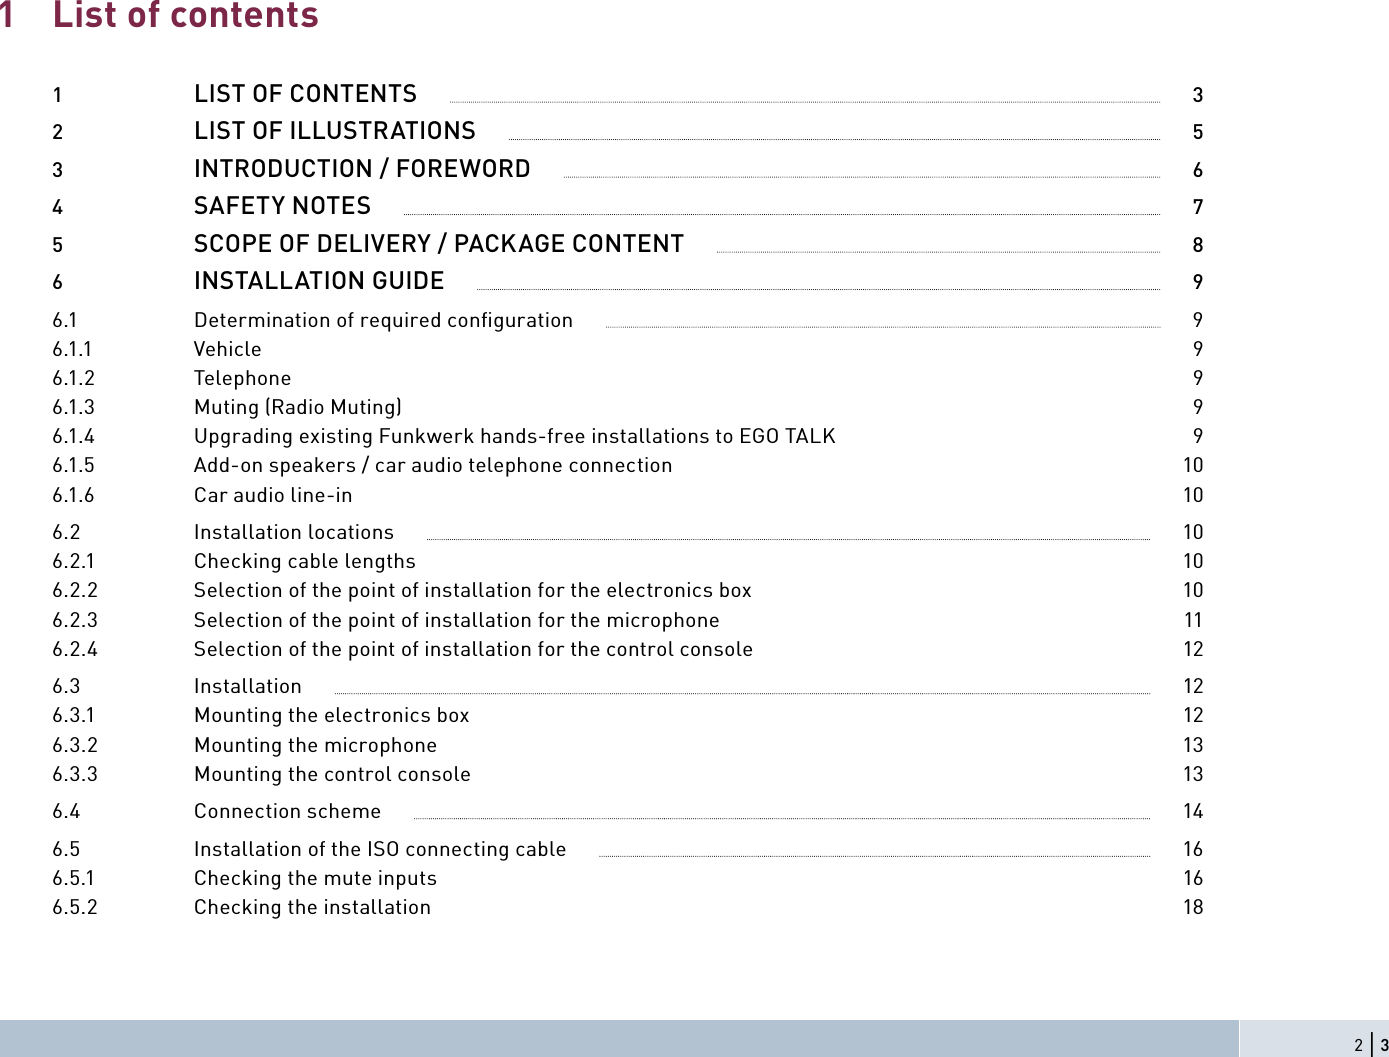 List of contents1  LIST OF CONTENTS              32  LIST OF ILLUSTRATIONS              53  INTRODUCTION / FOREWORD              64  SAFETY NOTES              75  SCOPE OF DELIVERY / PACKAGE CONTENT              86  INSTALLATION GUIDE              96.1  Determination of required conﬁ guration              96.1.1 Vehicle  96.1.2 Telephone  96.1.3  Muting (Radio Muting)   96.1.4  Upgrading existing Funkwerk hands-free installations to EGO TALK   96.1.5  Add-on speakers / car audio telephone connection  106.1.6  Car audio line-in   106.2  Installation locations              106.2.1  Checking cable lengths   106.2.2  Selection of the point of installation for the electronics box  106.2.3  Selection of the point of installation for the microphone   116.2.4  Selection of the point of installation for the control console   126.3  Installation              126.3.1  Mounting the electronics box   126.3.2  Mounting the microphone   136.3.3  Mounting the control console   136.4  Connection scheme              146.5  Installation of the ISO connecting cable              166.5.1  Checking the mute inputs   166.5.2  Checking the installation  1812 | 3